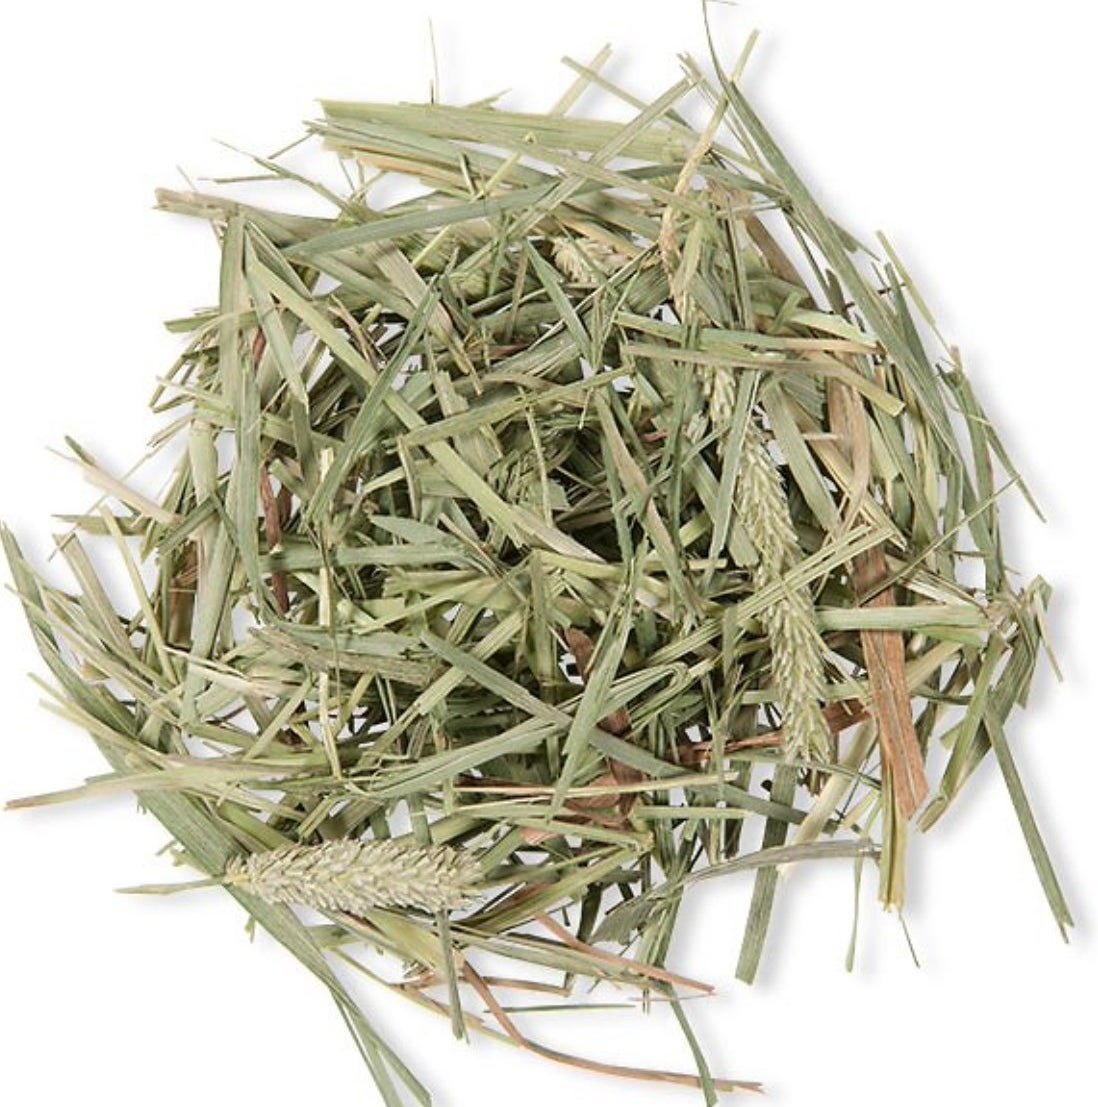 A pile of green hay